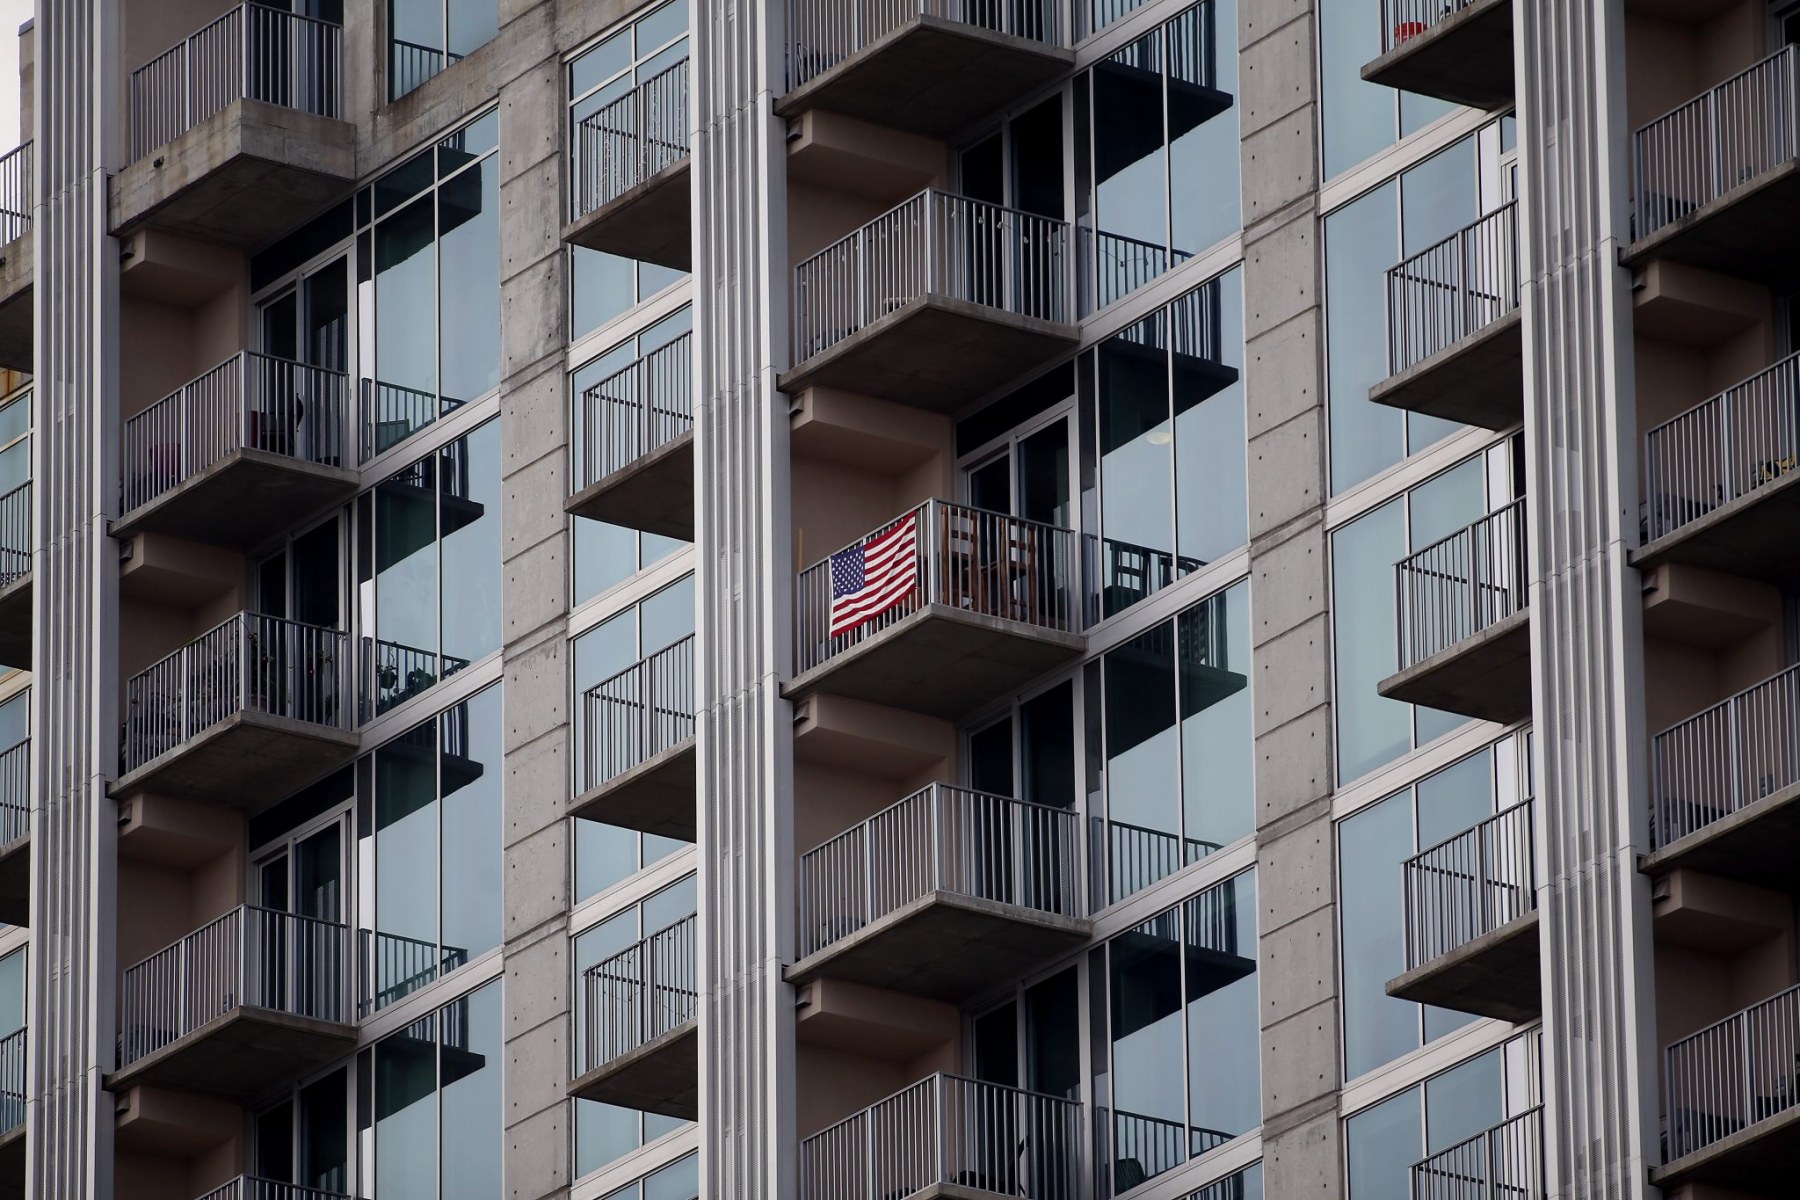 A lone American flag on the balcony of a high-rise in Downtown Raleigh the first work day after the Wake County ‘Stay at Home’ proclamation. March 30, 2020. Raleigh, NC